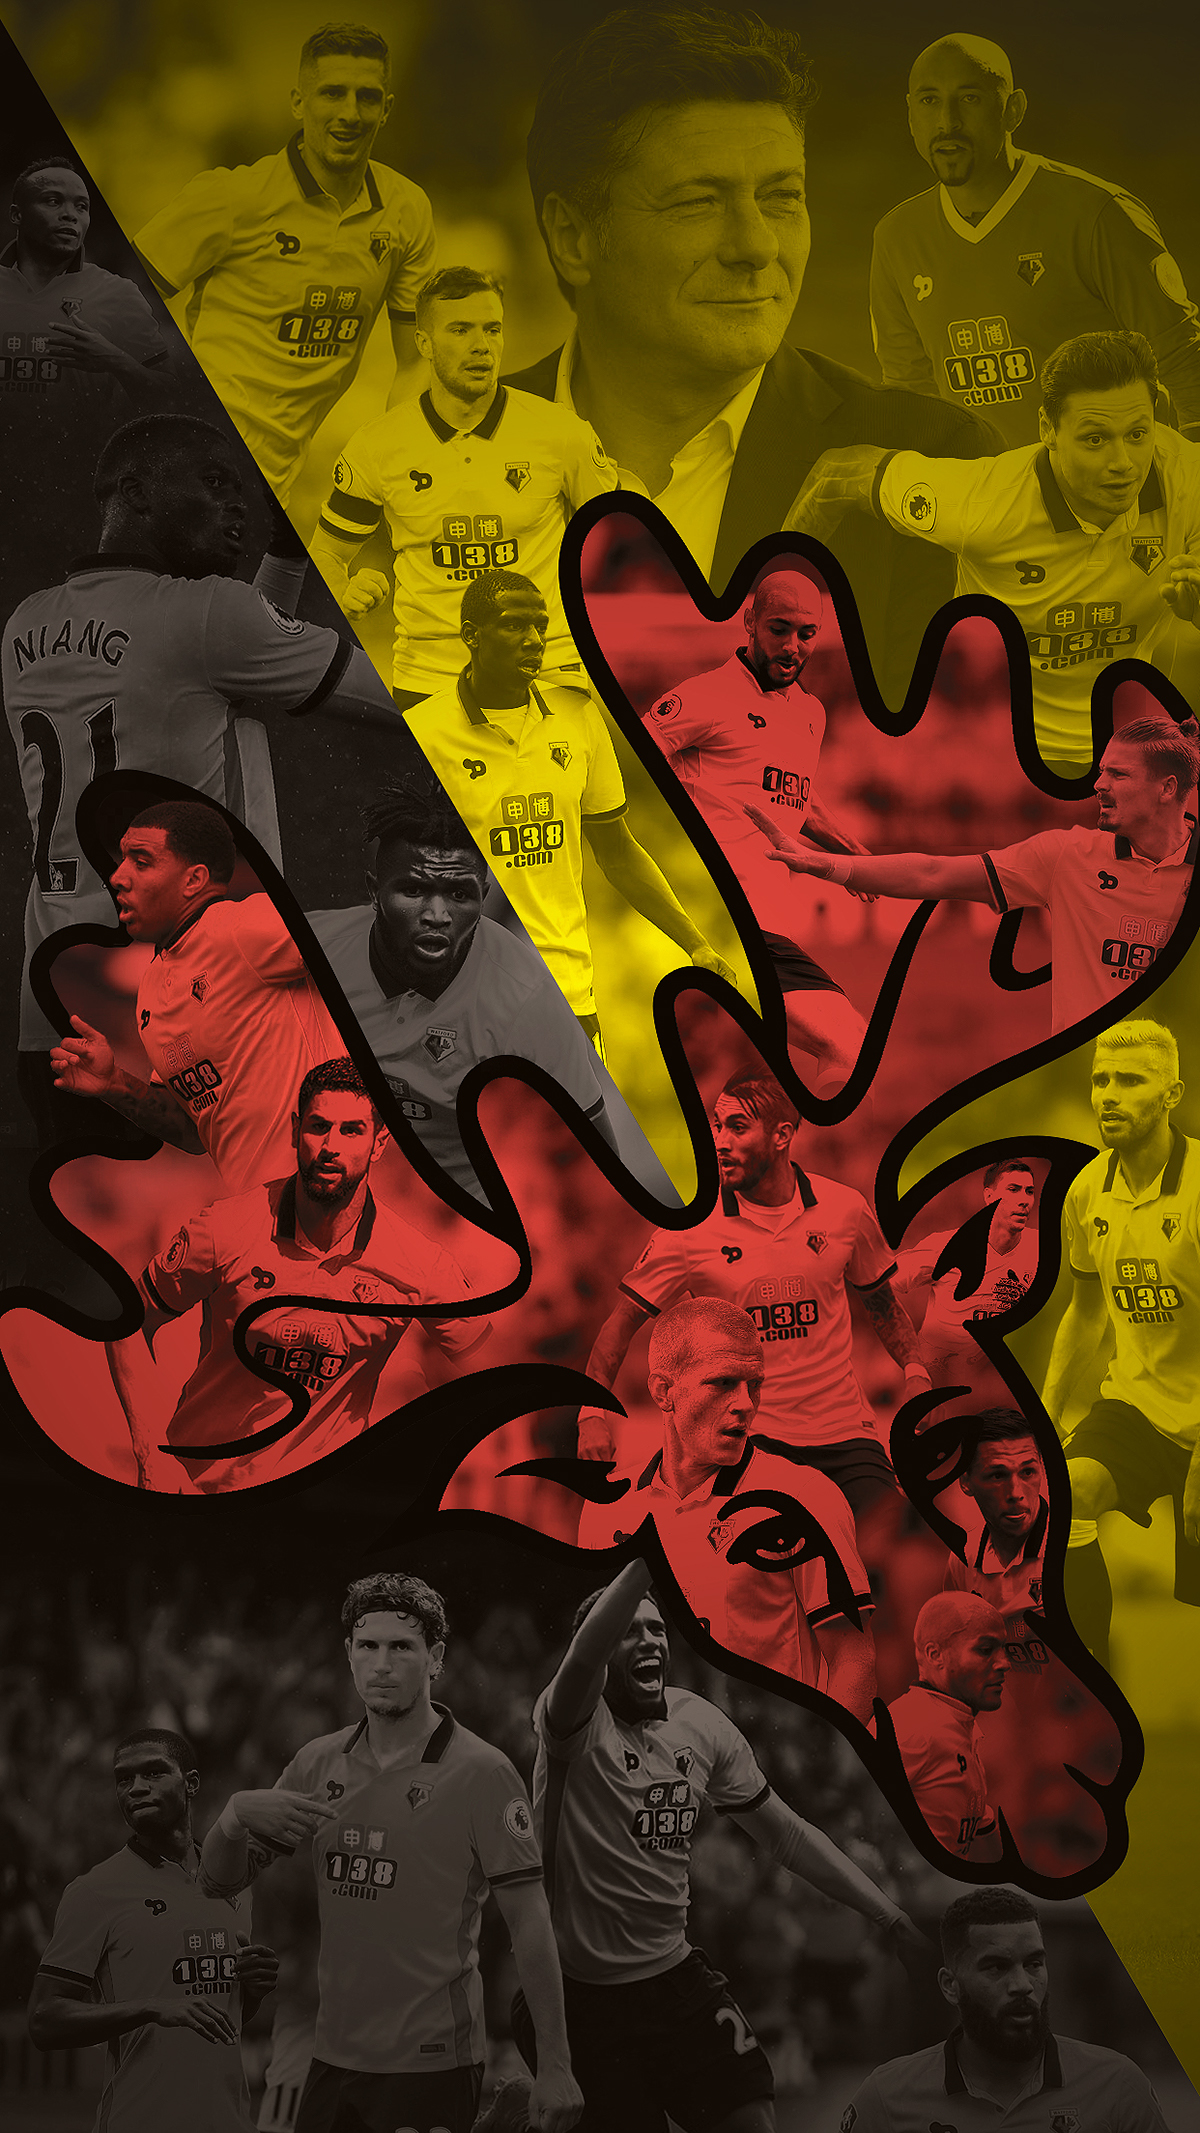 Watford F C Wallpaper HD Background Image In Collection